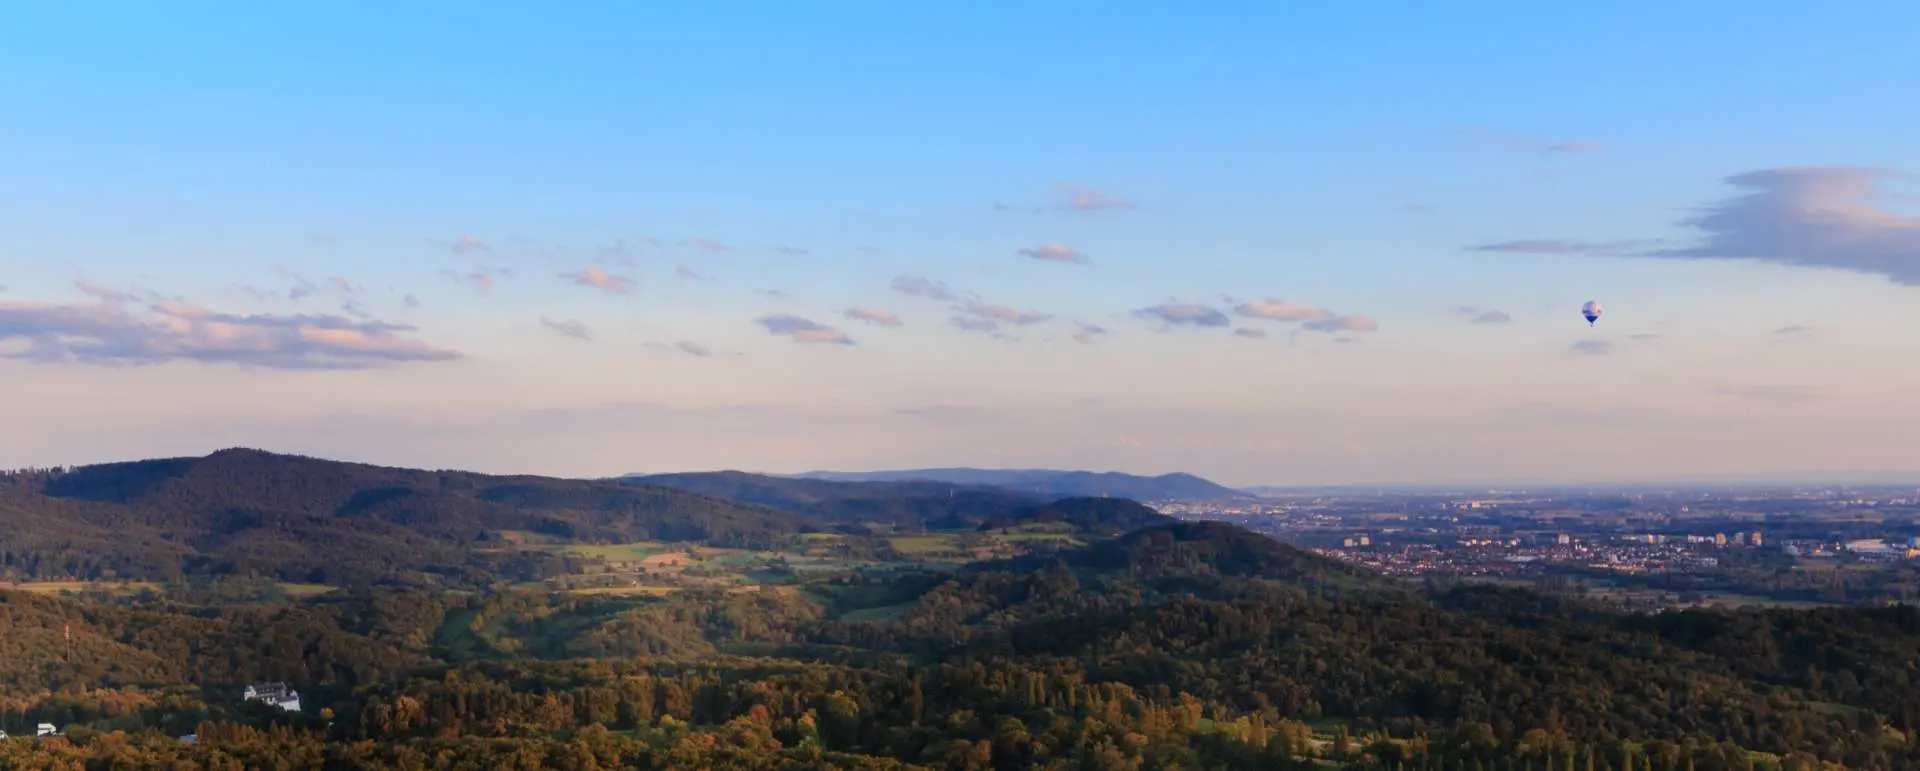 Constituency of Odenwald - the destination for affordable group accomodations